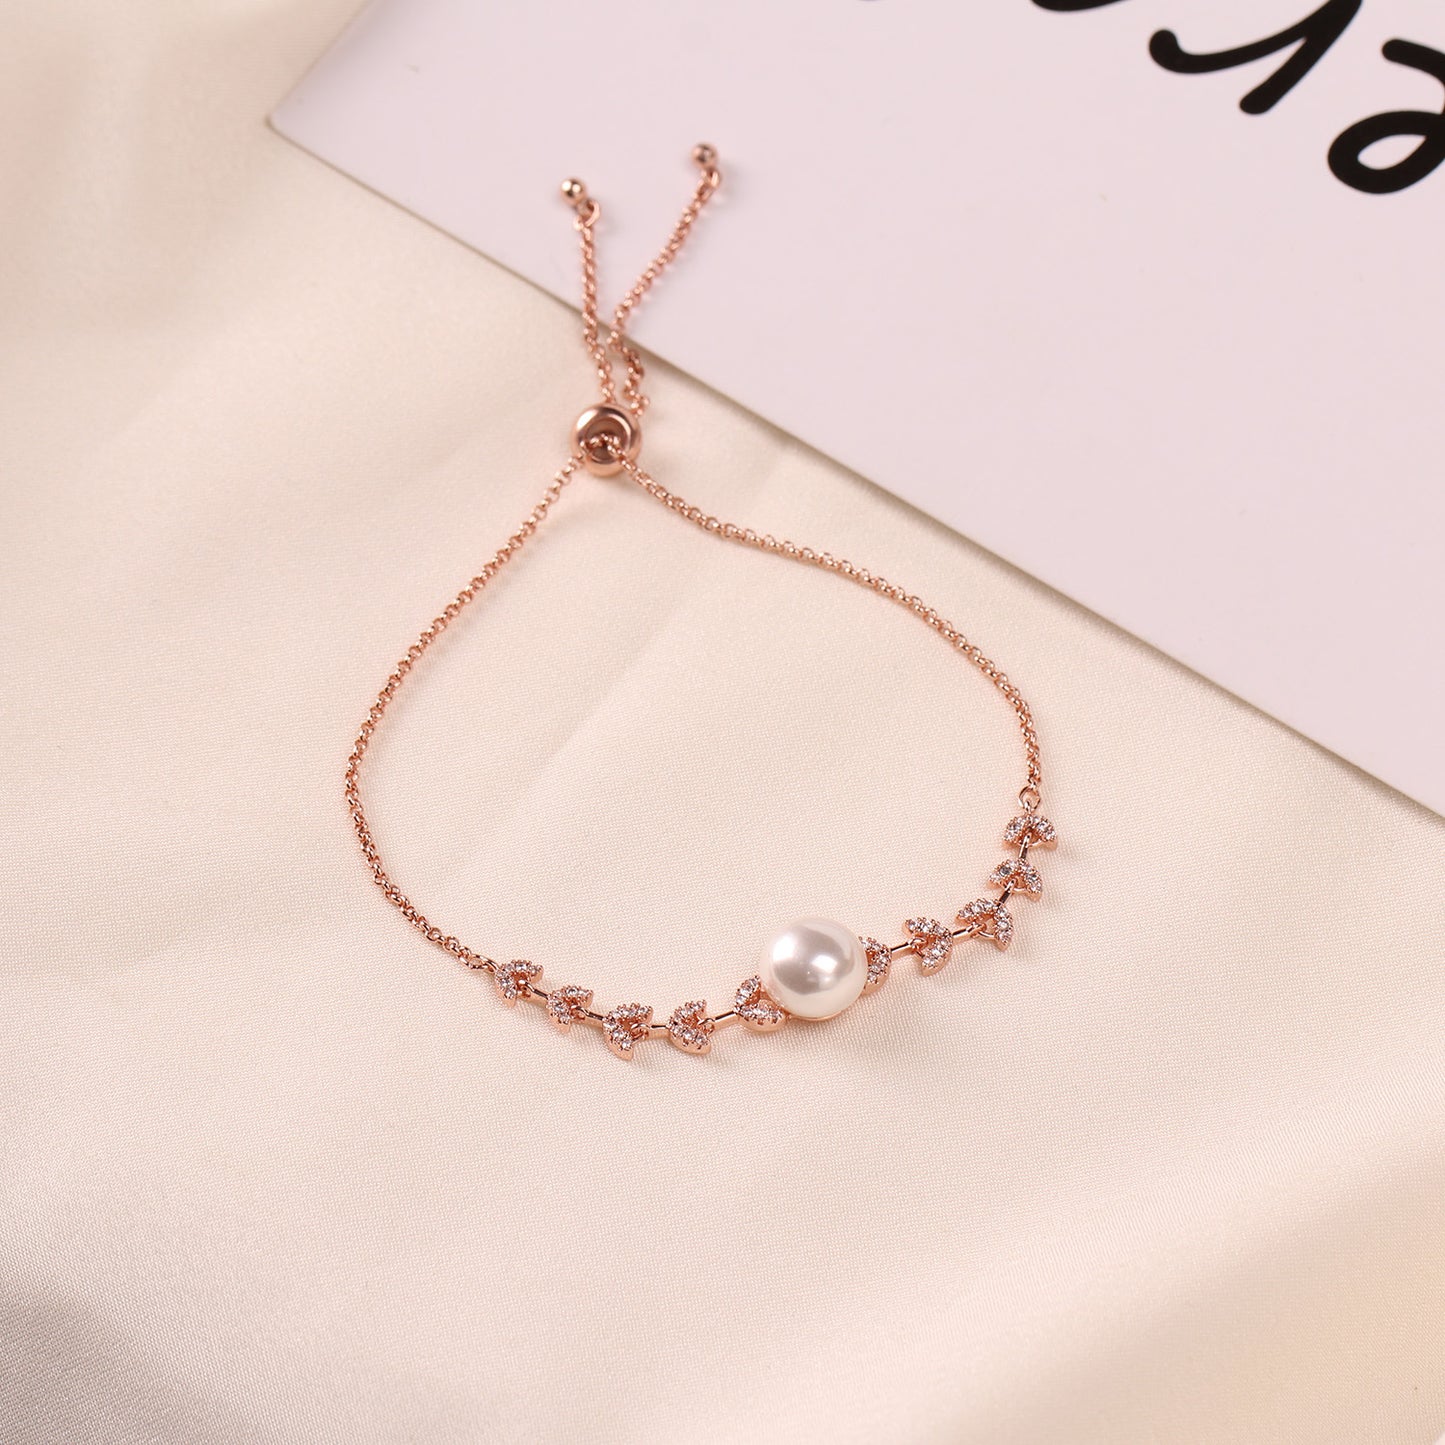 New Style Leaf Bead Copper Alloy Charm Bracelet With Freshwater Pearl Rose Gold-Plated Drawable Bracelet For Gift